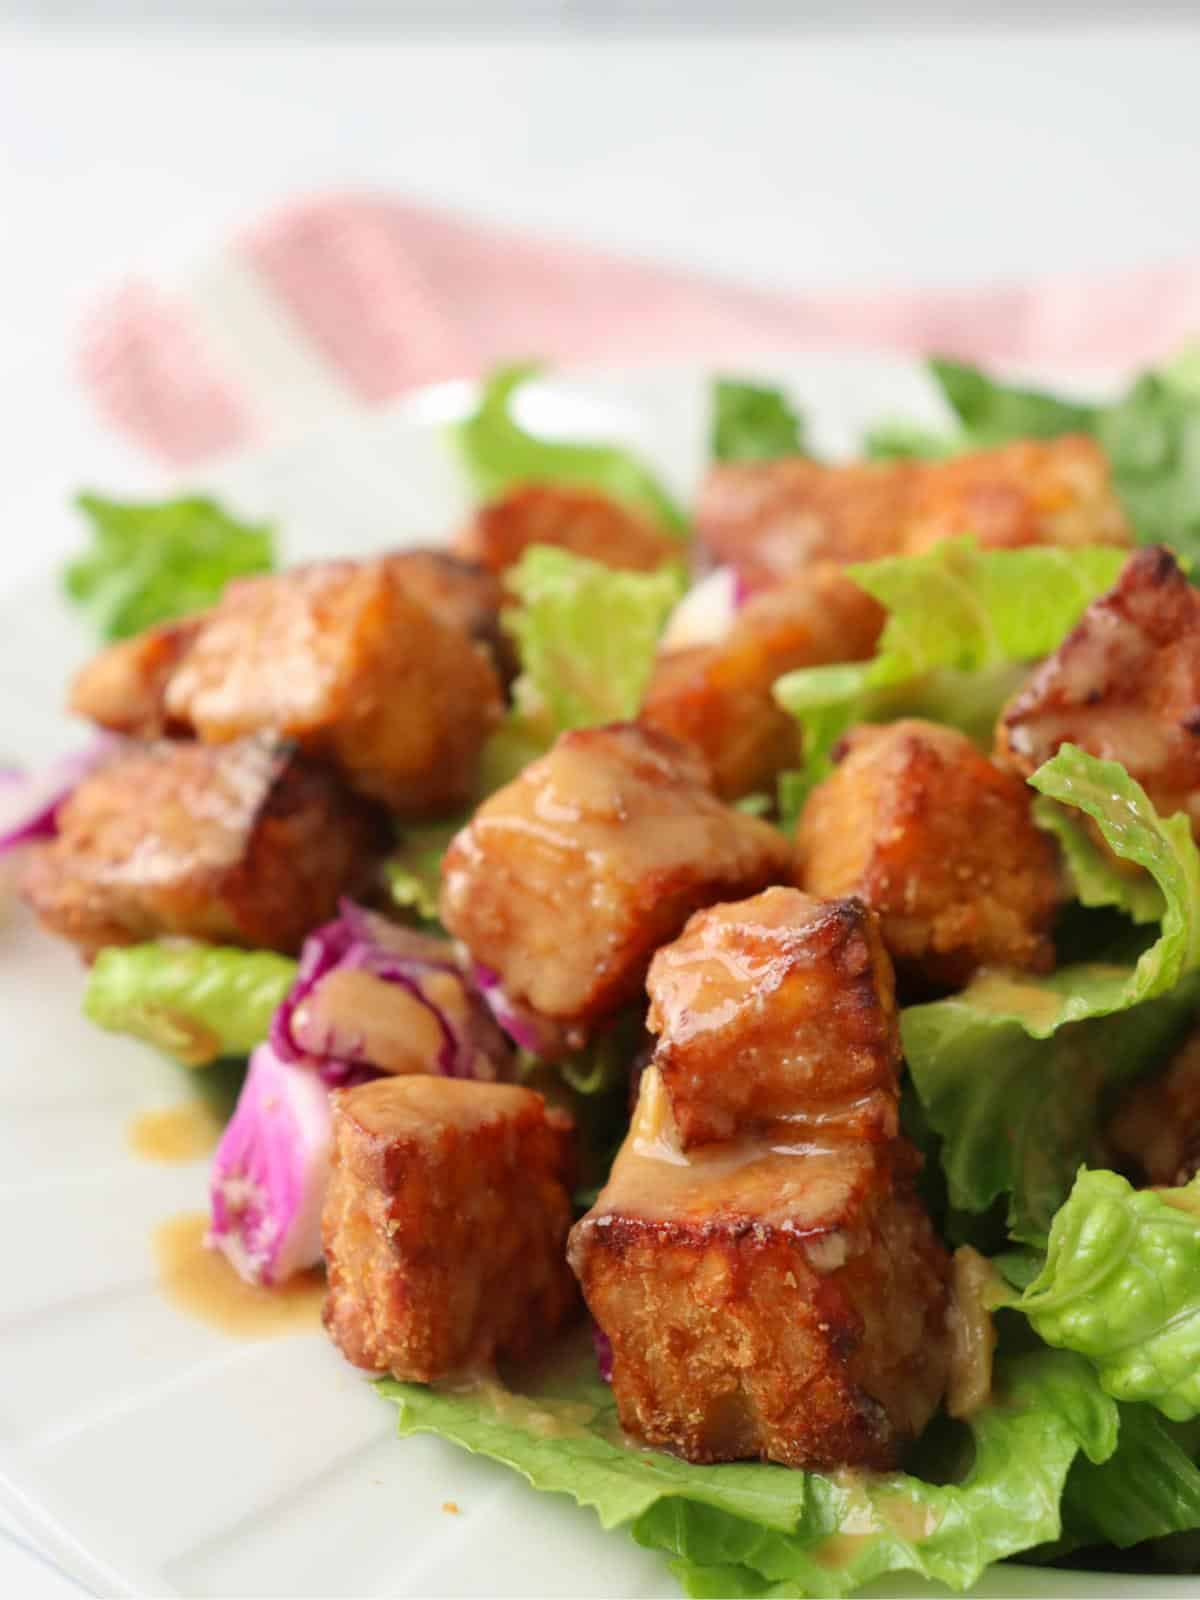 Air fryer tempeh cubes on top of a salad with a tahini dressing.